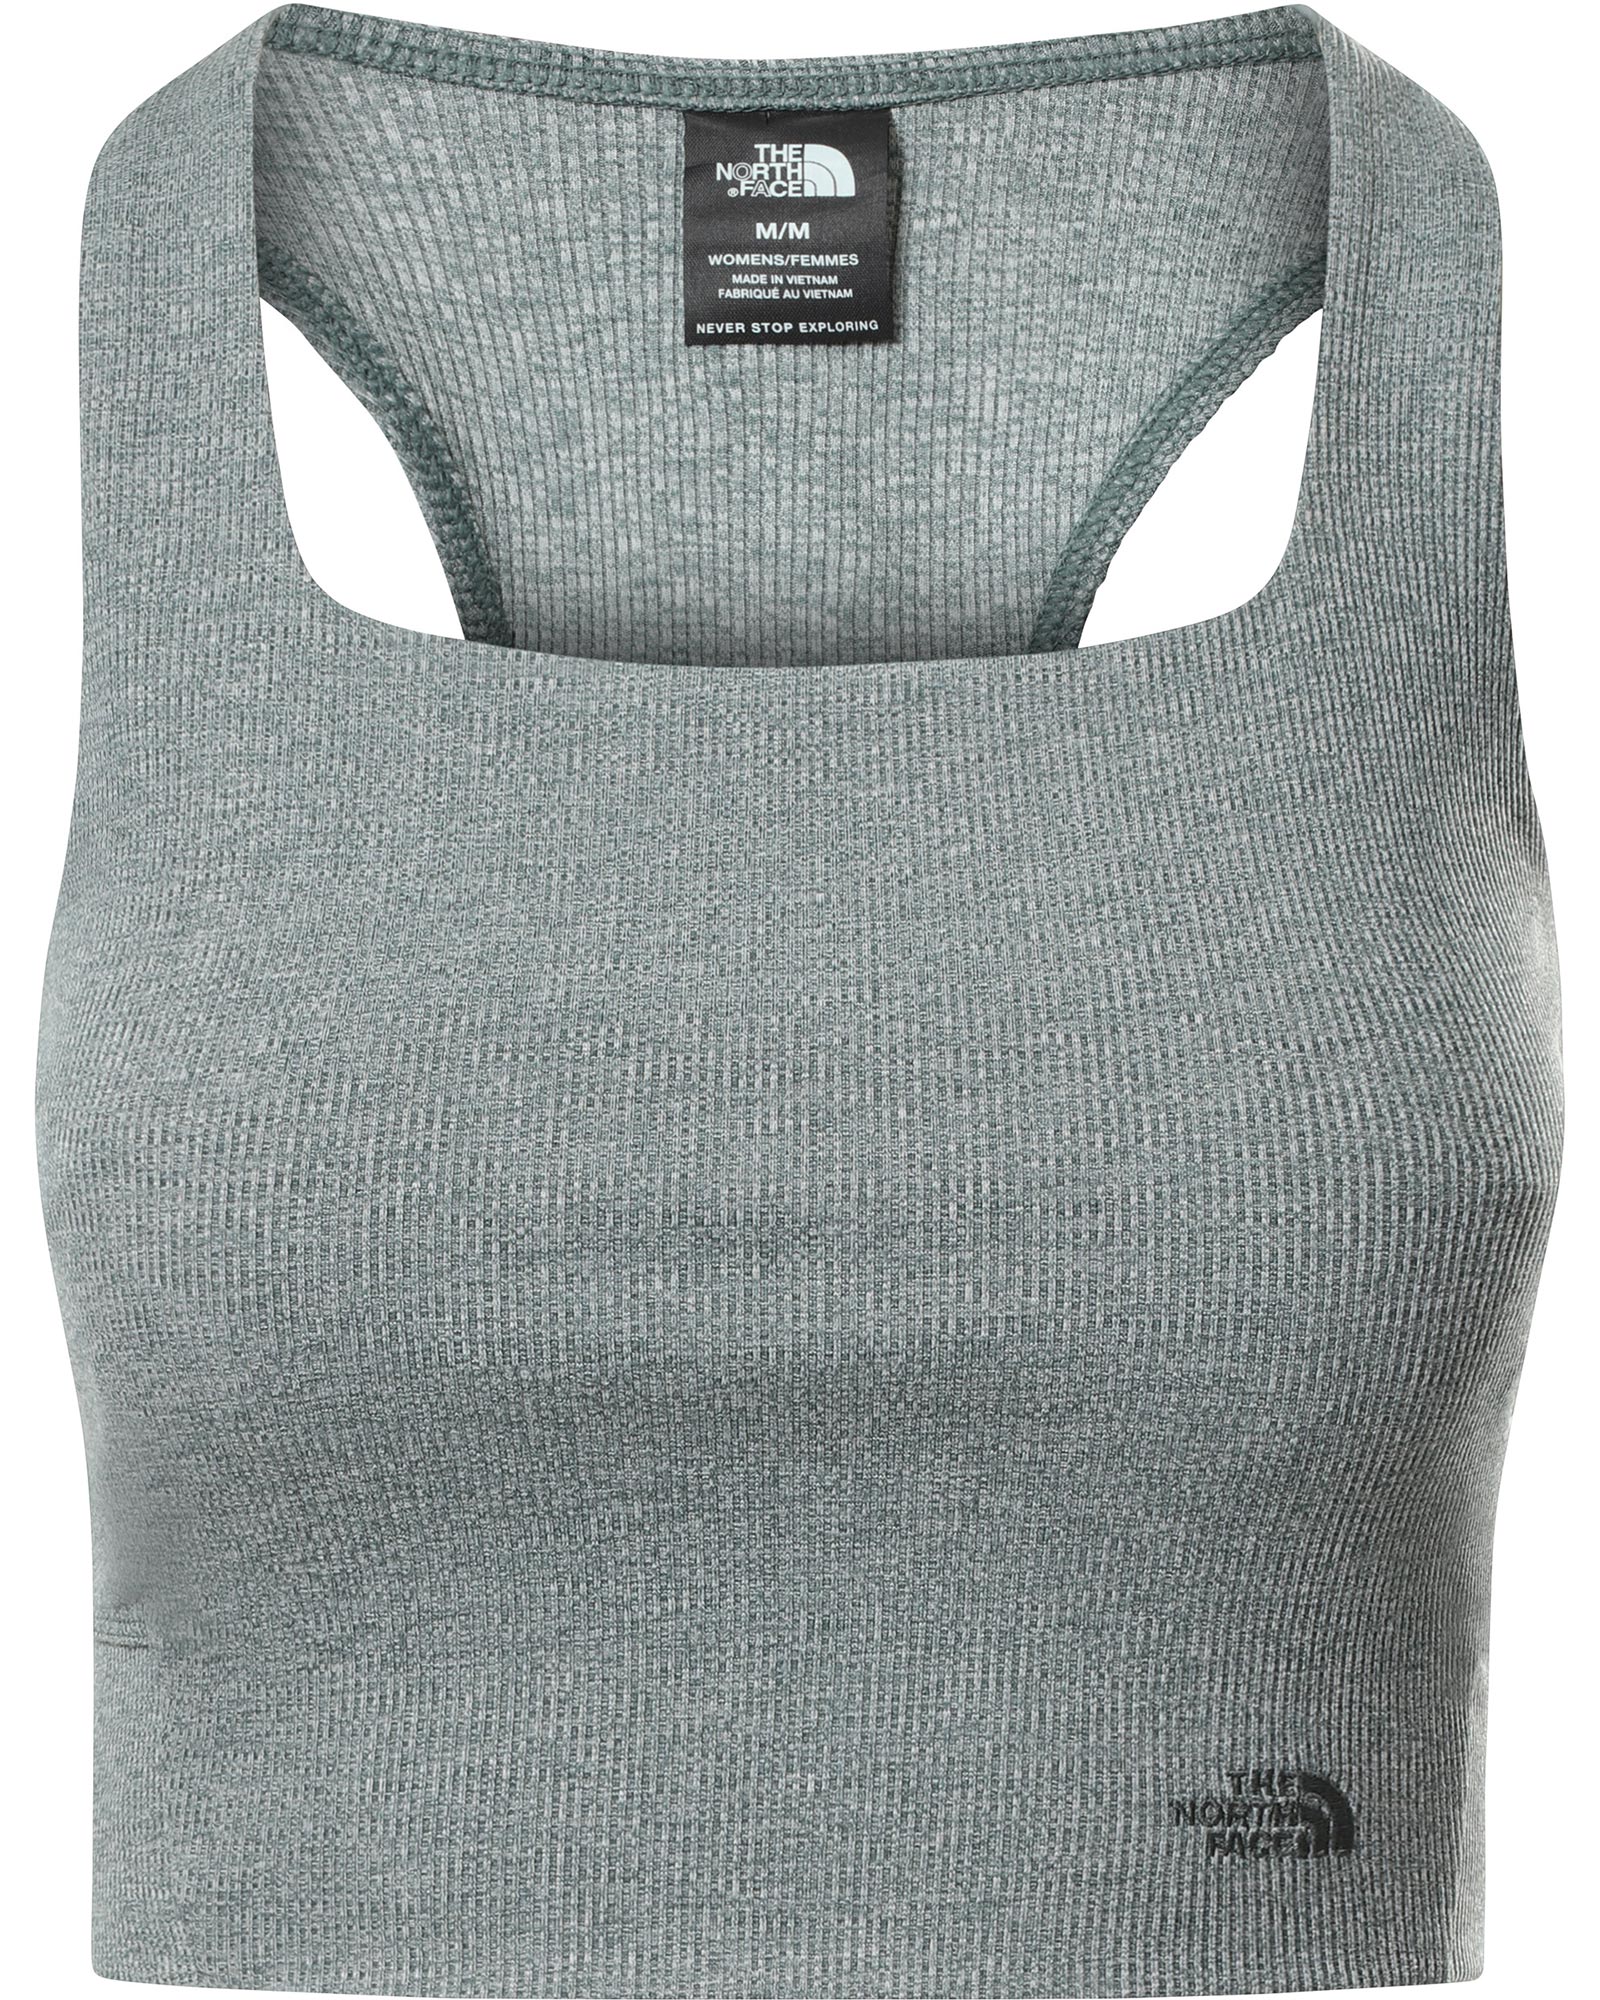 The North Face AT EA Rib Knit Women’s Tank - Balsam Green Heather L